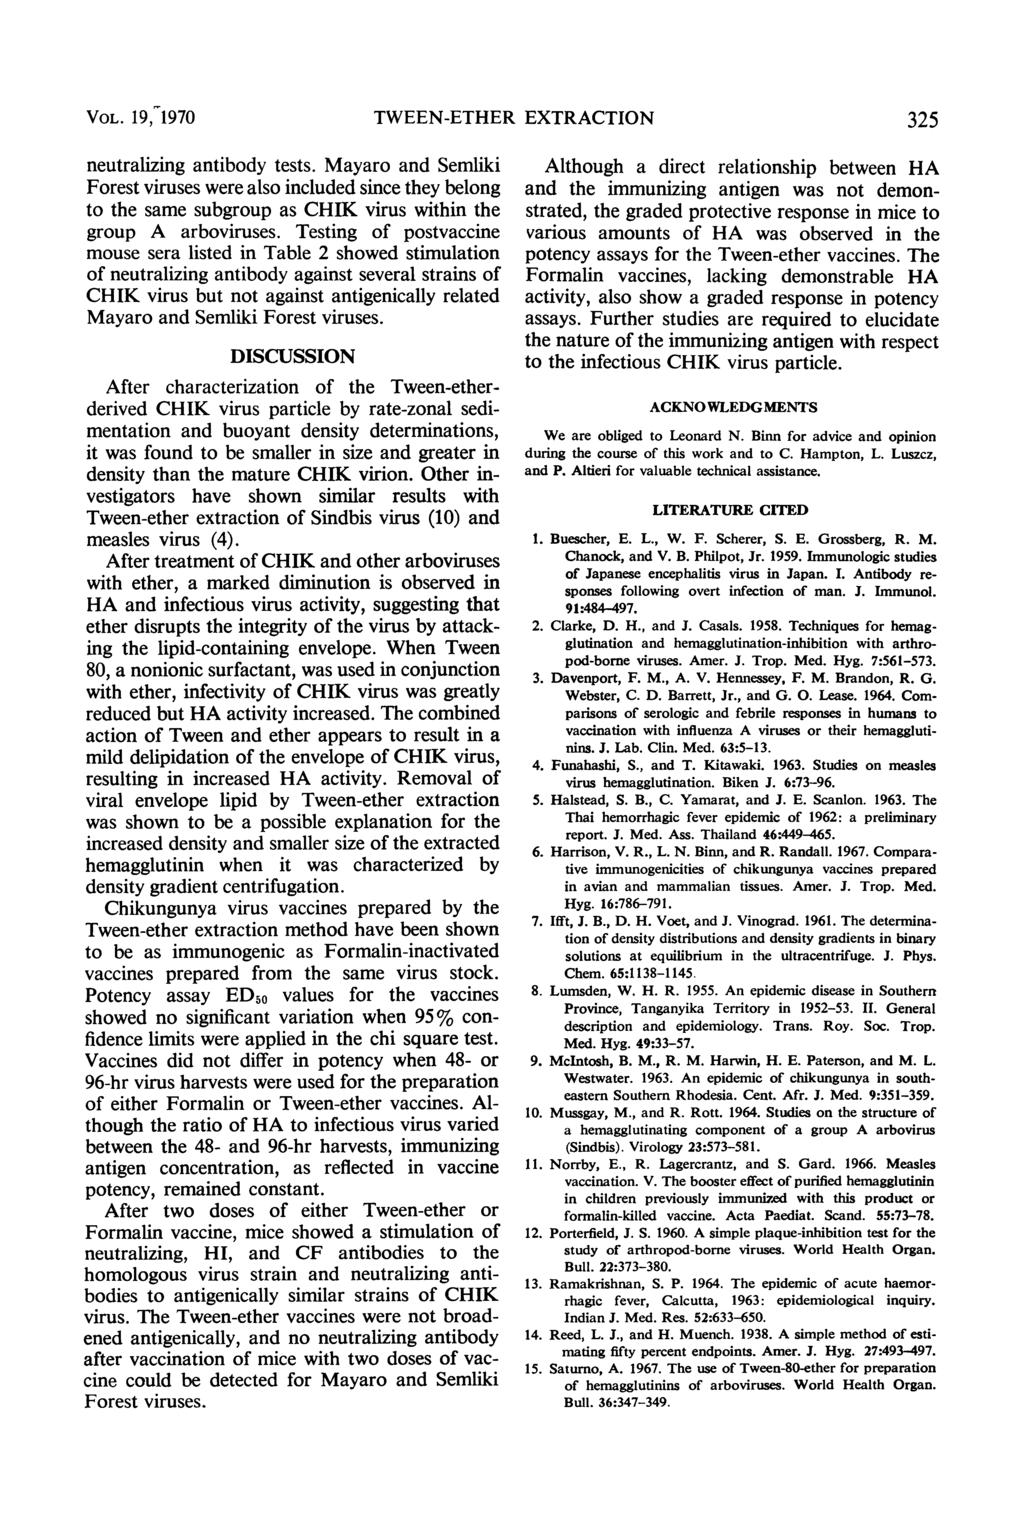 VOL. 19,1970 neutralizing antibody tests. Mayaro and Semliki Forest viruses were also included since they belong to the same subgroup as CHIK virus within the group A arboviruses.